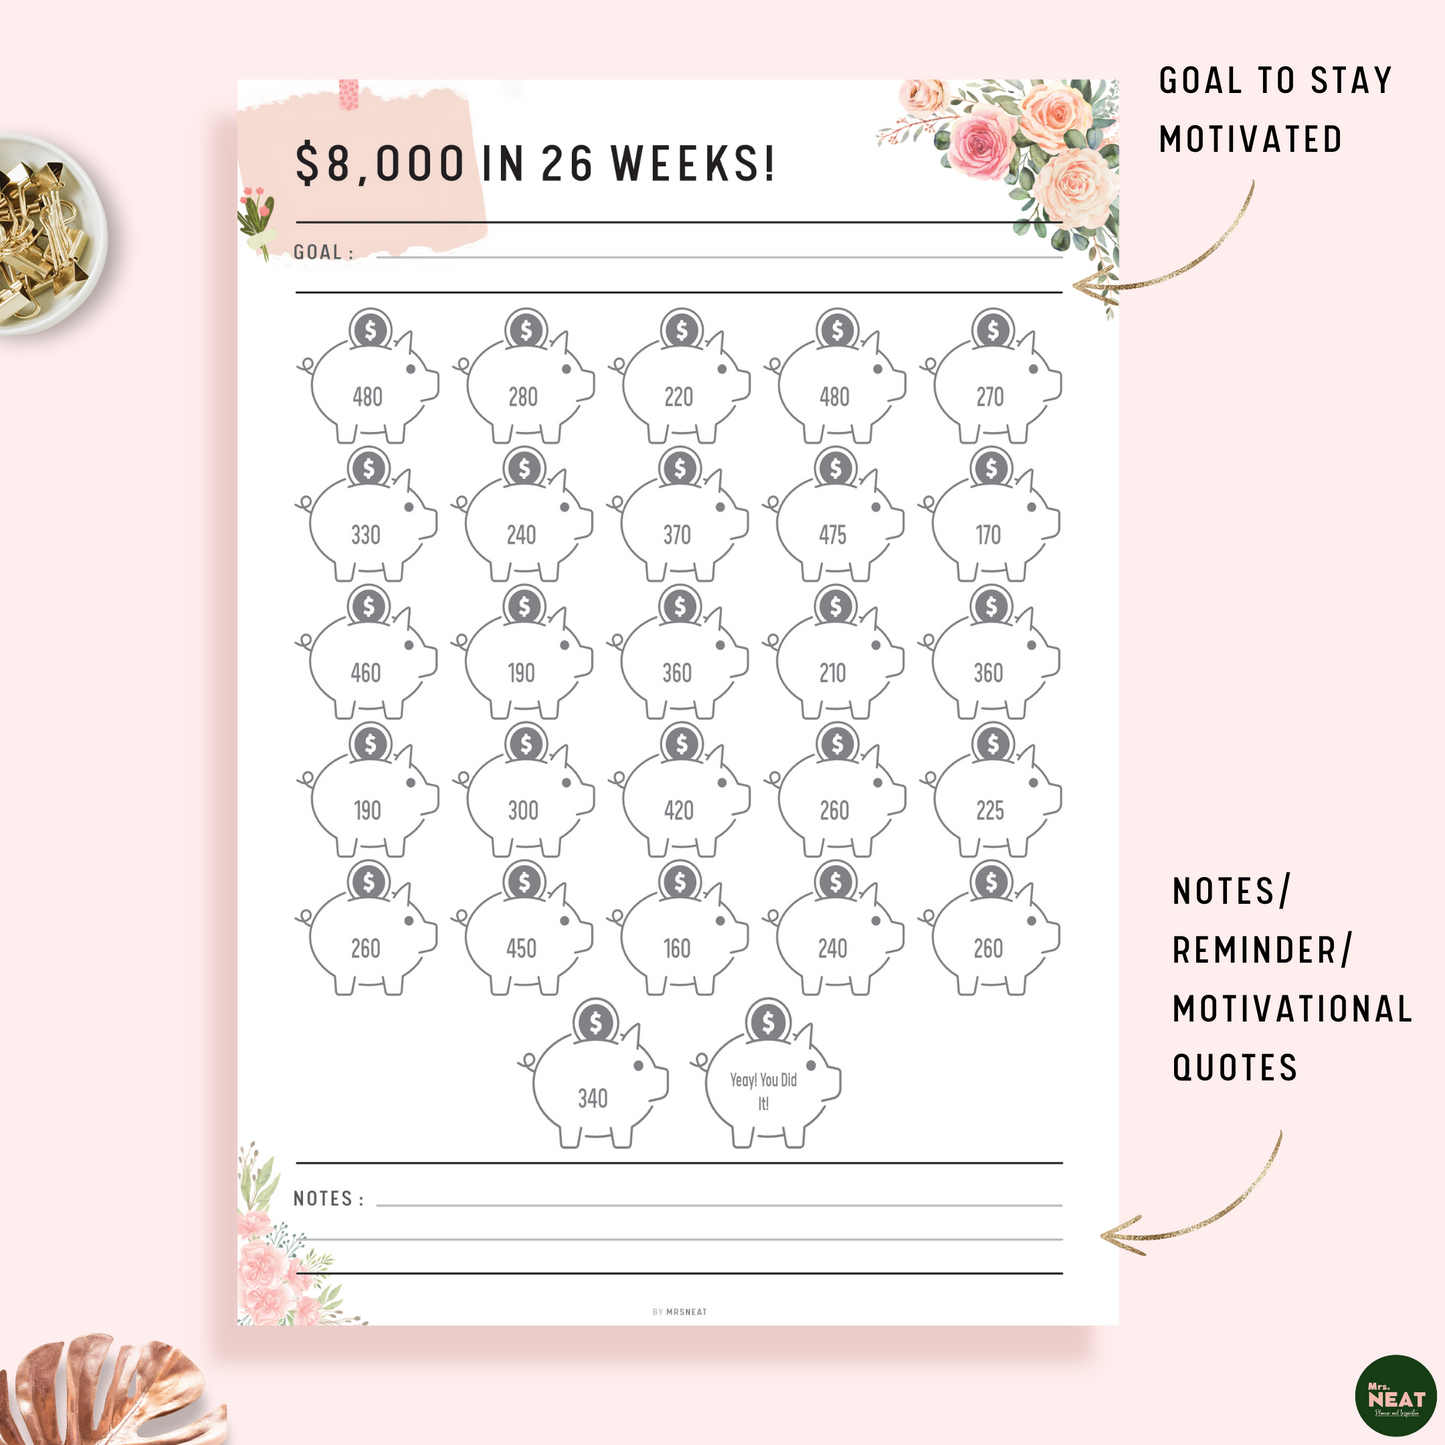 Cute Floral $8000 Money Saving Challenge in 26 Weeks Planner with room for Goal and Notes